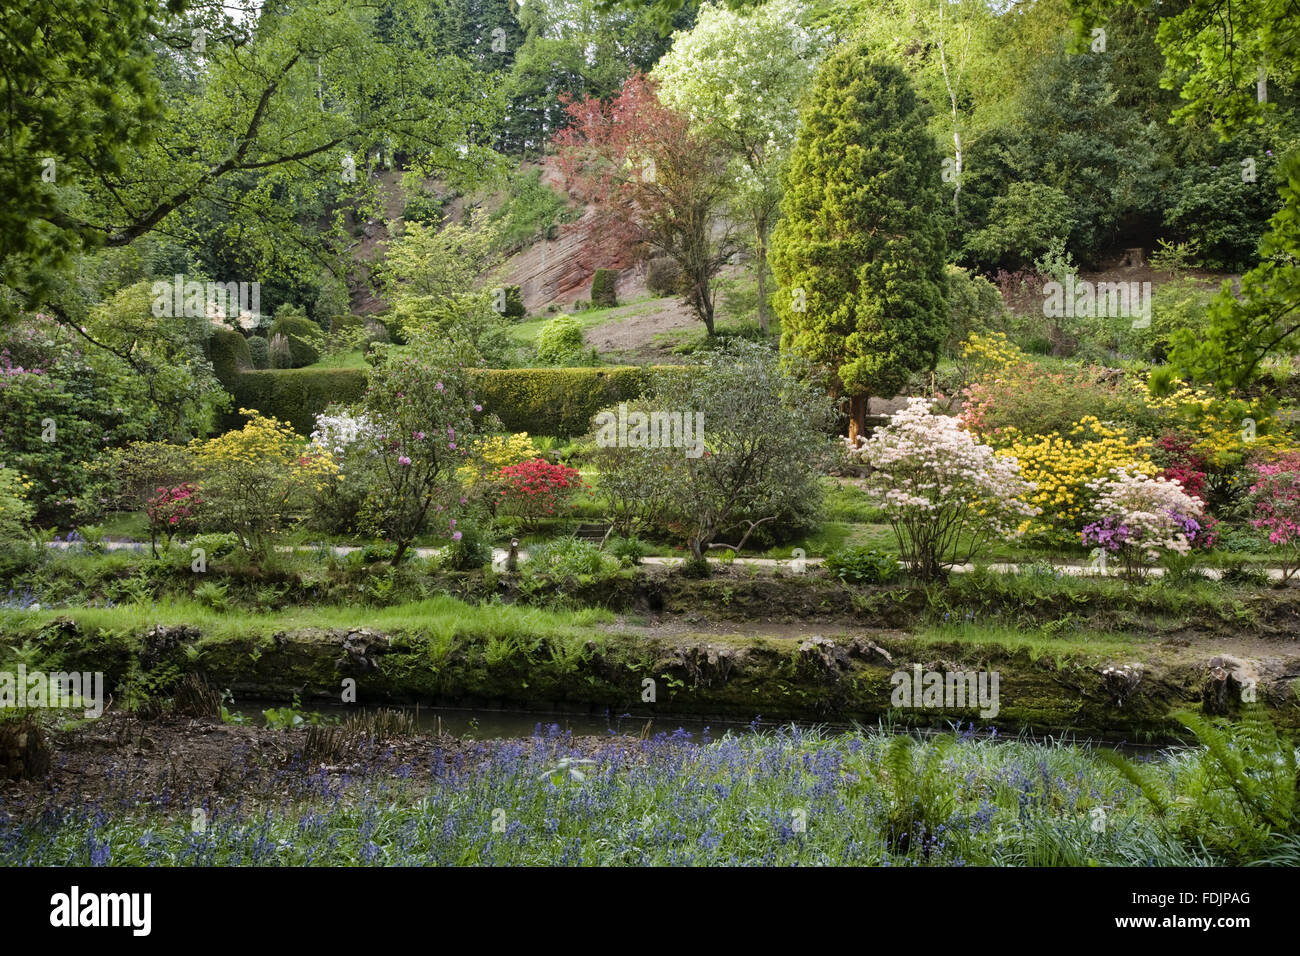 The river and garden which was created in the late eighteenth century by Samuel Greg, the mill owner, and his wife Hannah, to complement their house. The garden follows the valley of the Bollin river and is part of the Quarry Bank Mill and Styal Estate, W Stock Photo